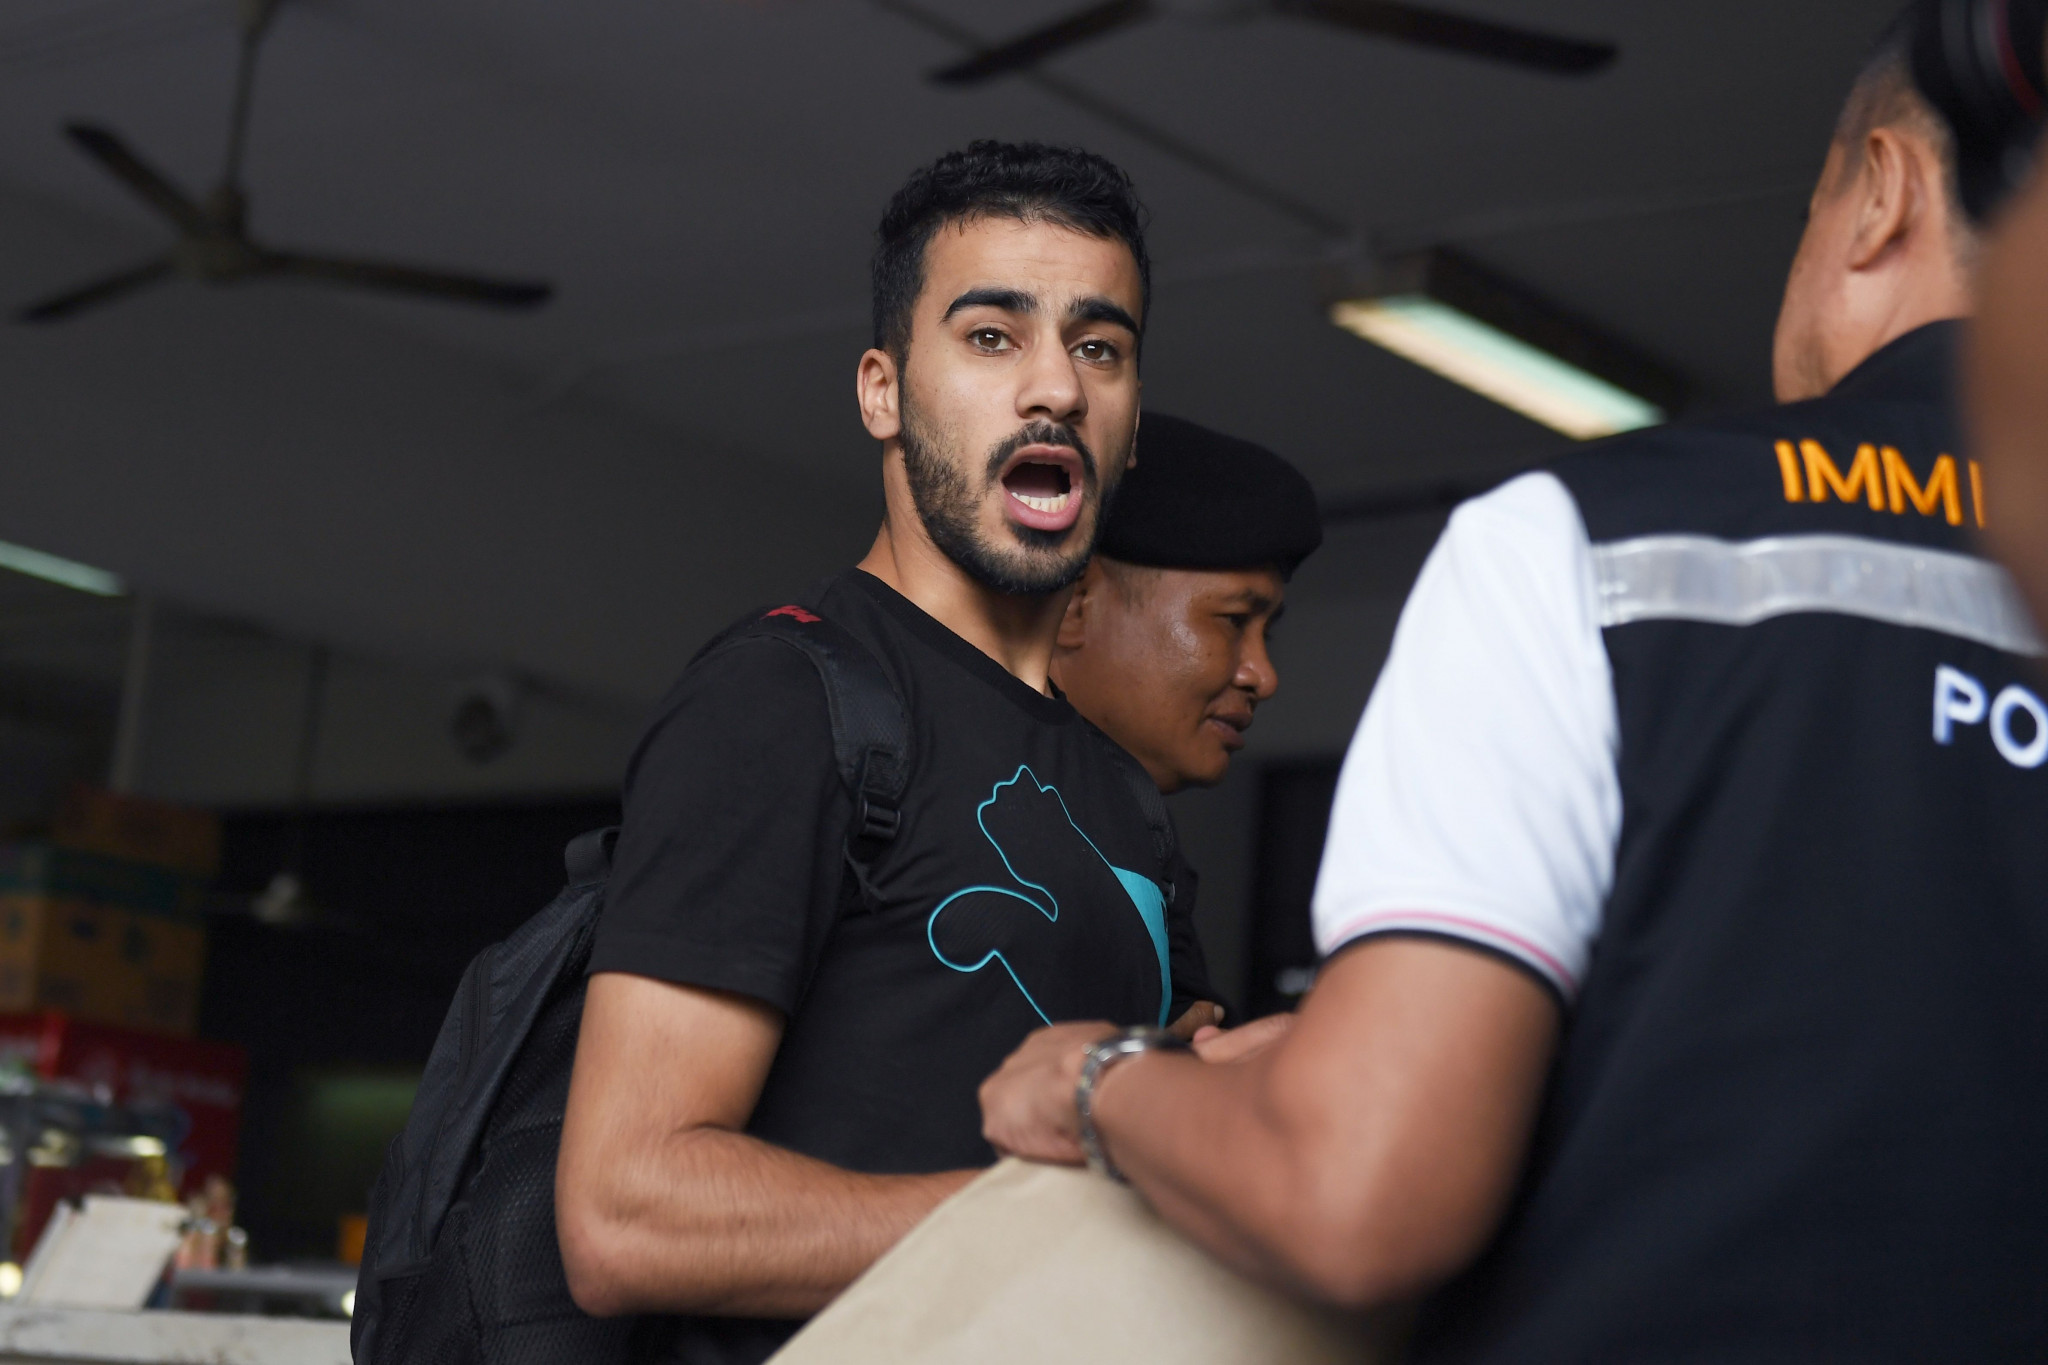 FIFA calls for "humane and speedy resolution" in Bahraini footballer extradition case